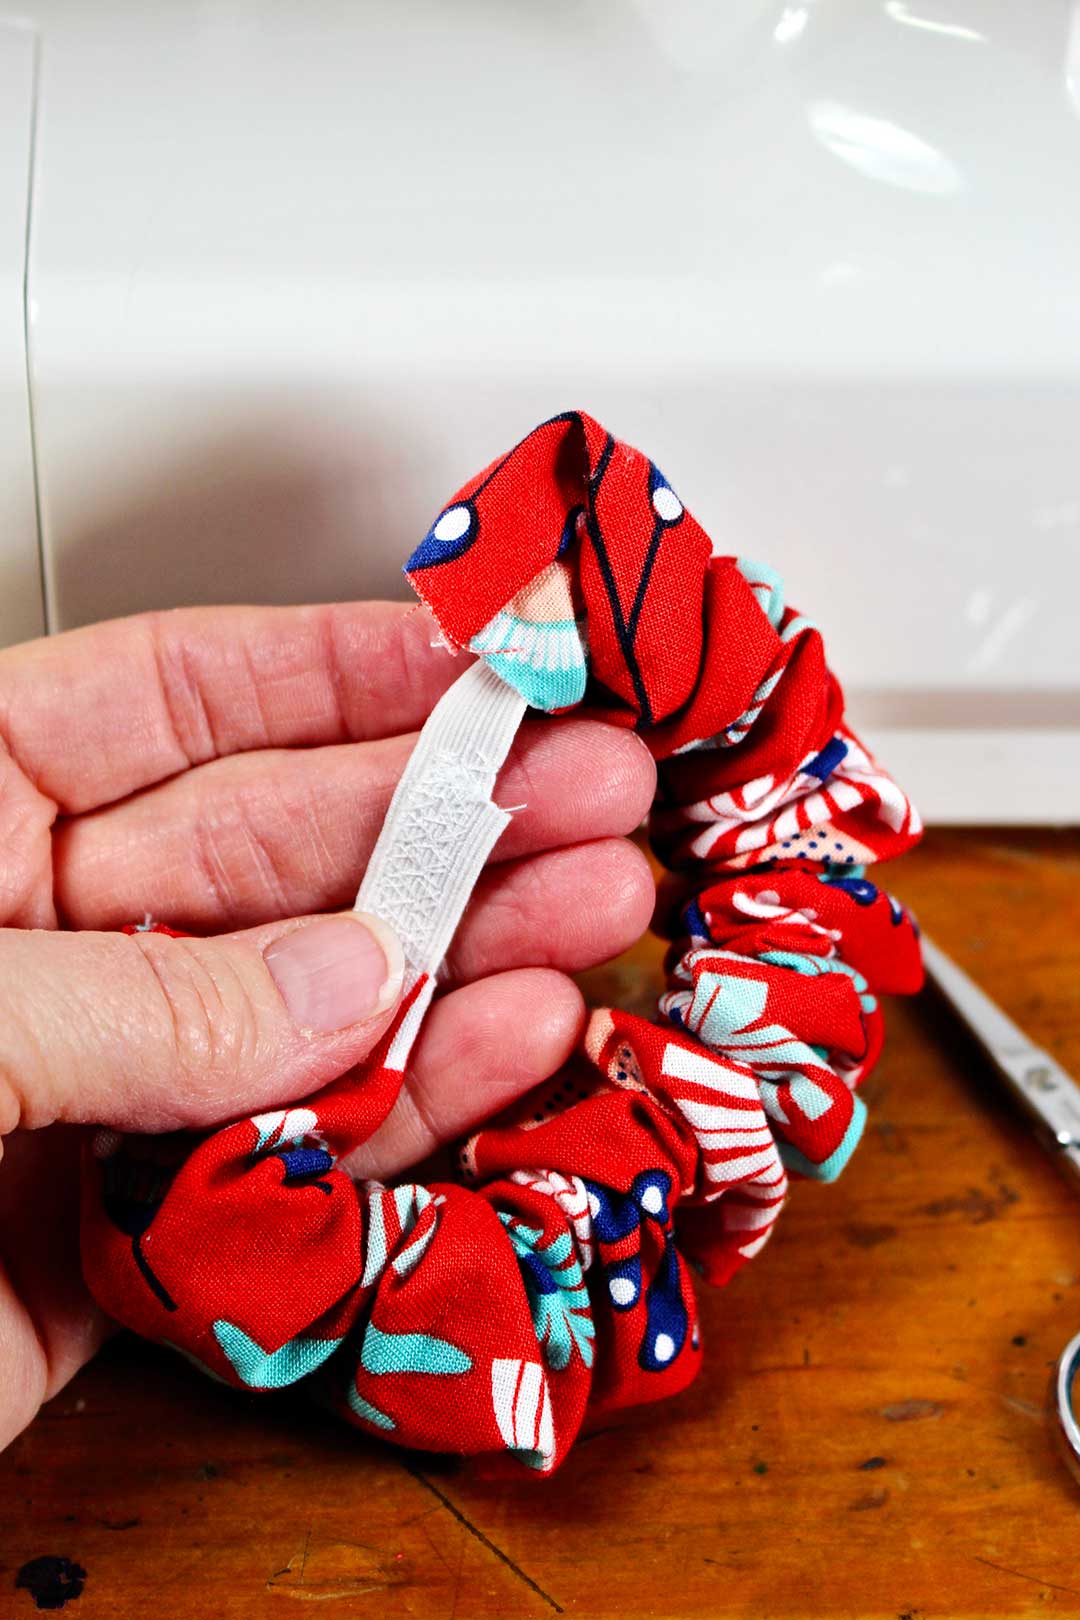 Person holding red patterned scrunchie showing elastic inside.